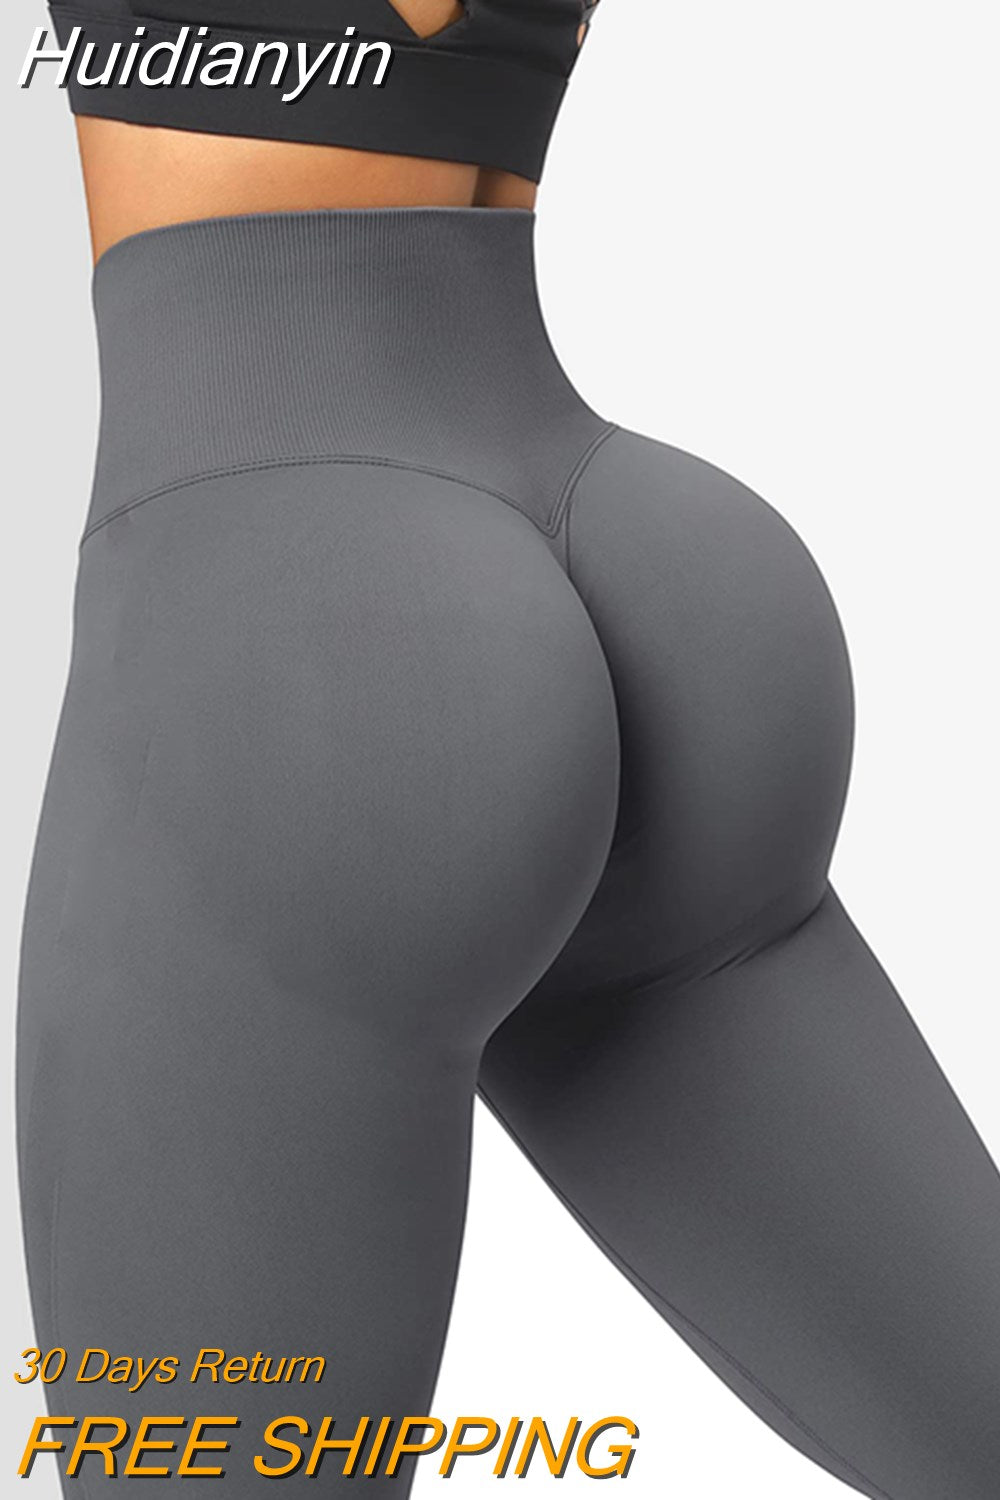 TRY TO BN Yoga Pants Fitness Sports Leggings Pocket High Waisted Booty  Scrunch Leggings Push Up Gym Workout Running Tights Women